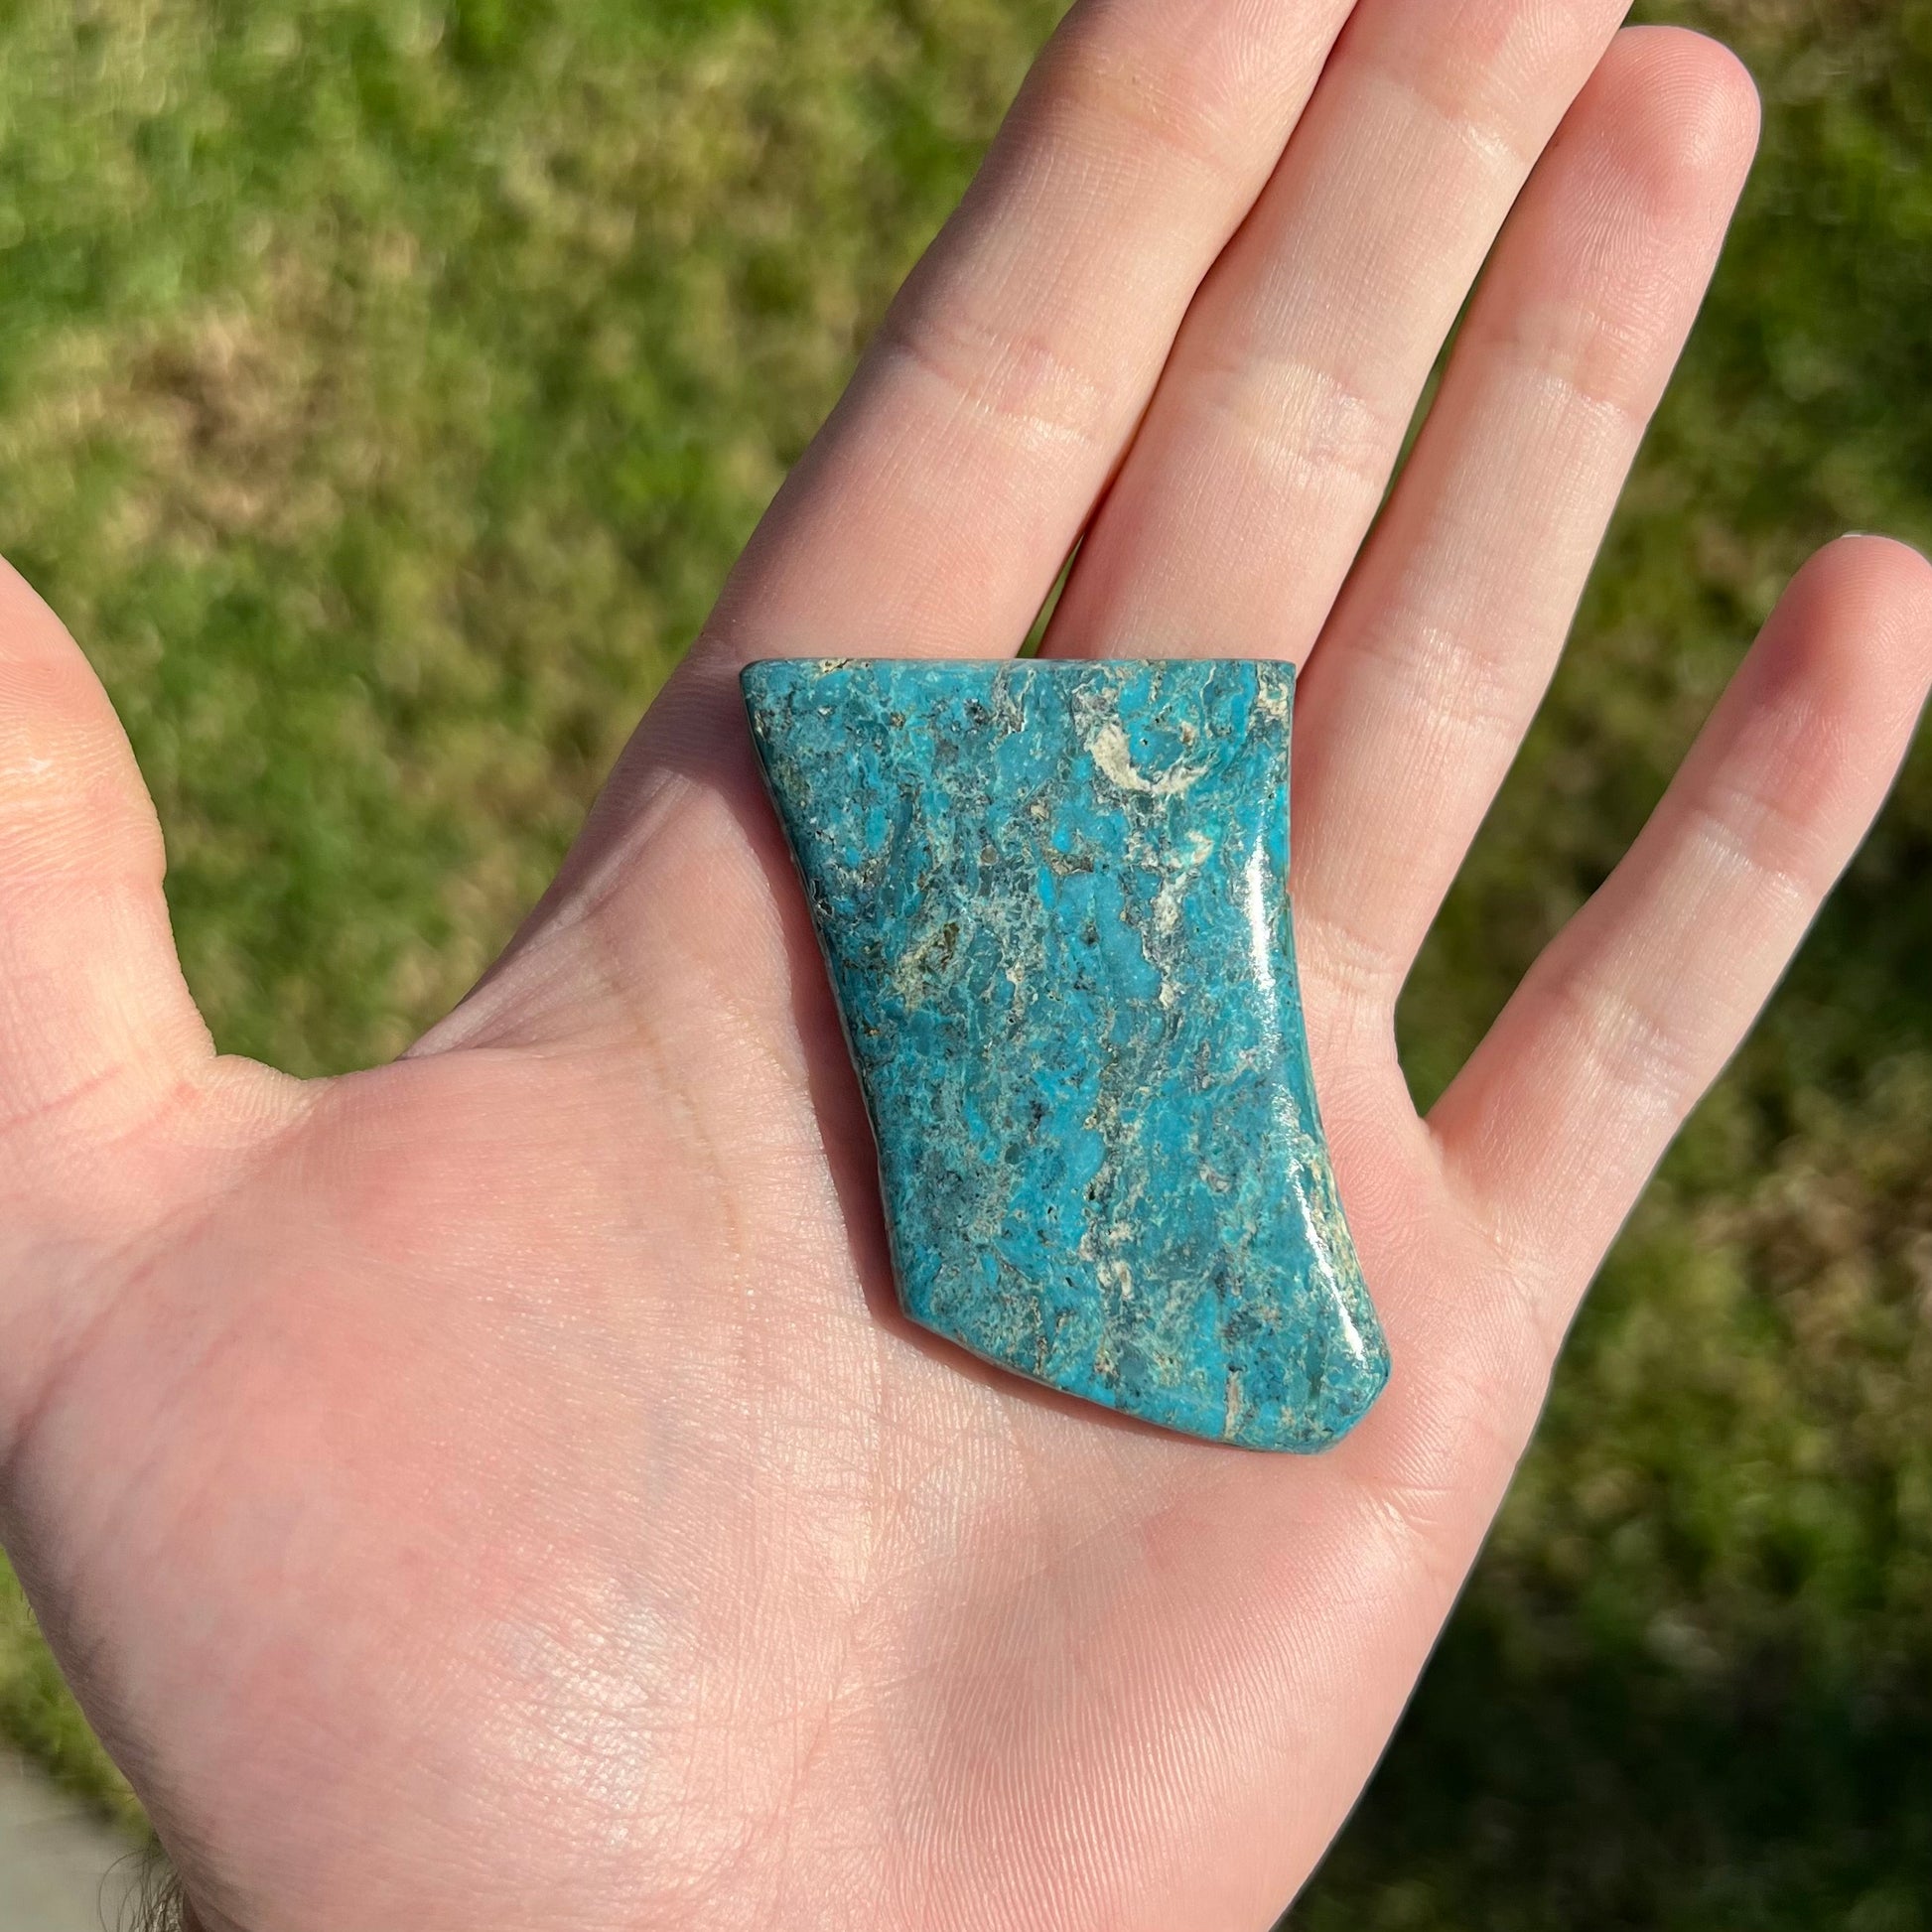 One loose semi-polished Stormy Mountain turquoise stone.